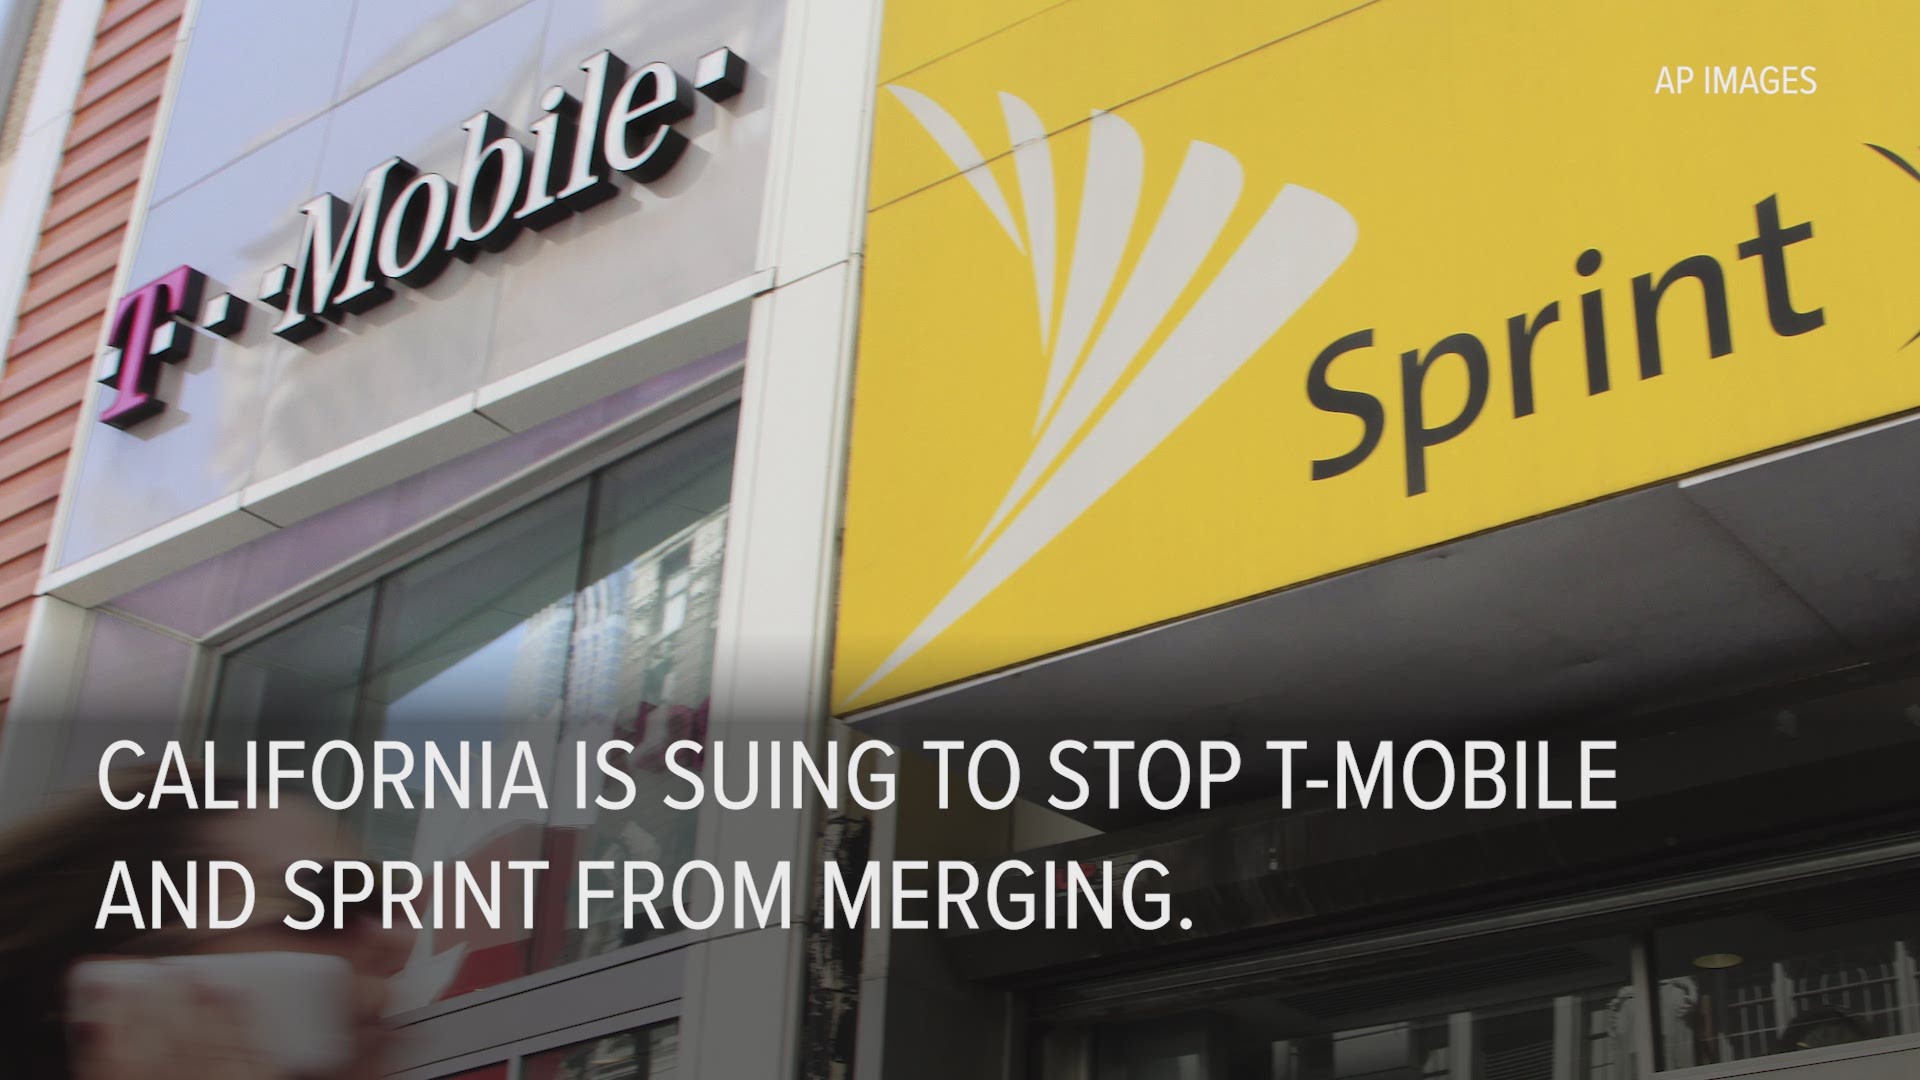 Ten states, including California, are suing to stop T-Mobile and Sprint from merging.